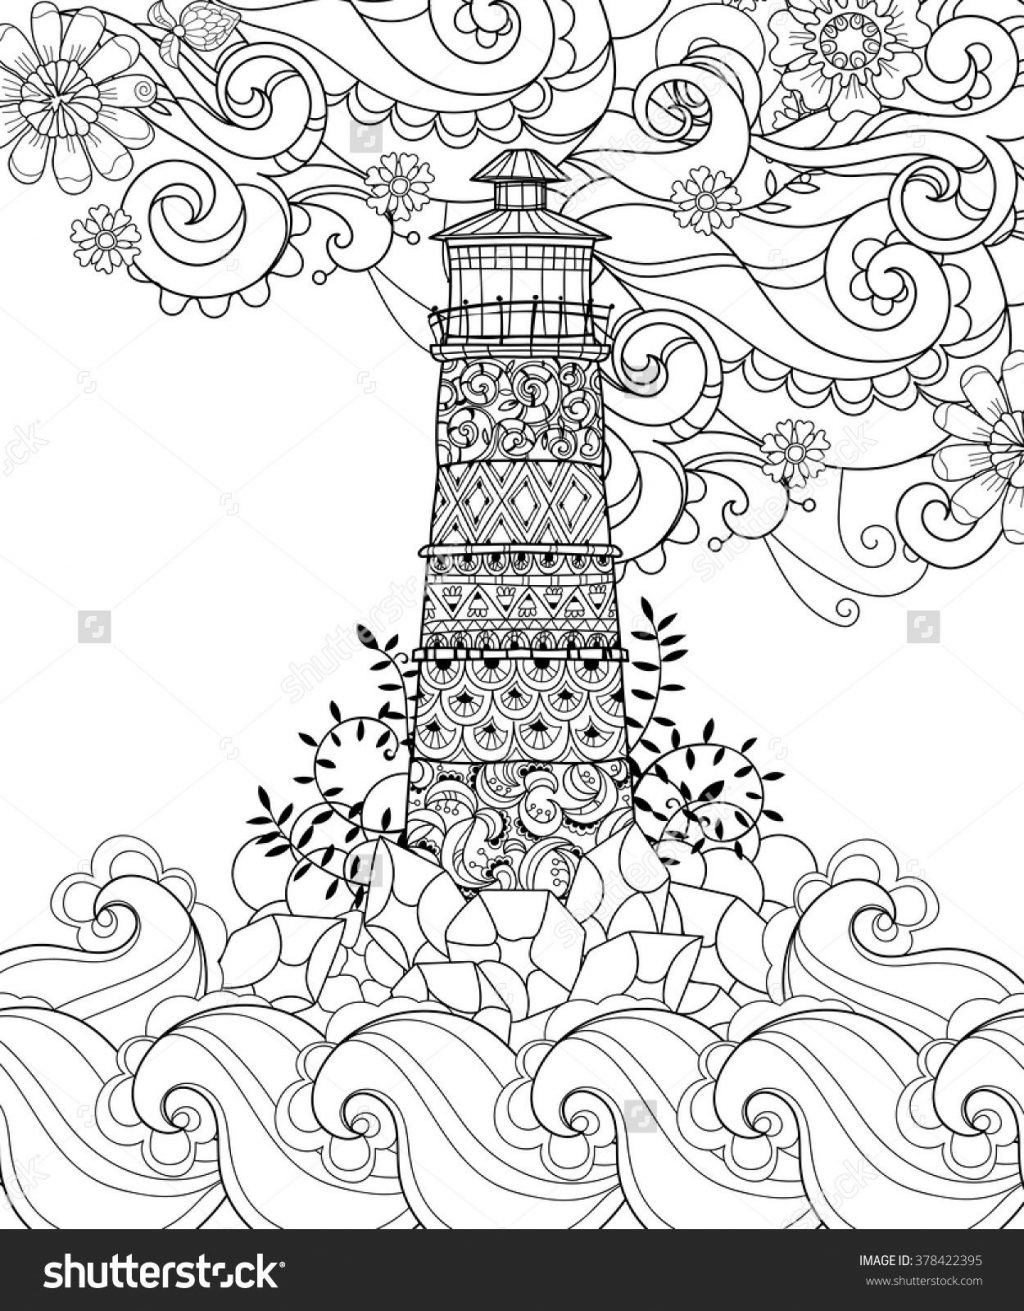 Coloring Page ~ Zen Coloring Pages Printable Page At Getdrawings Com - Free Printable Zen Coloring Pages